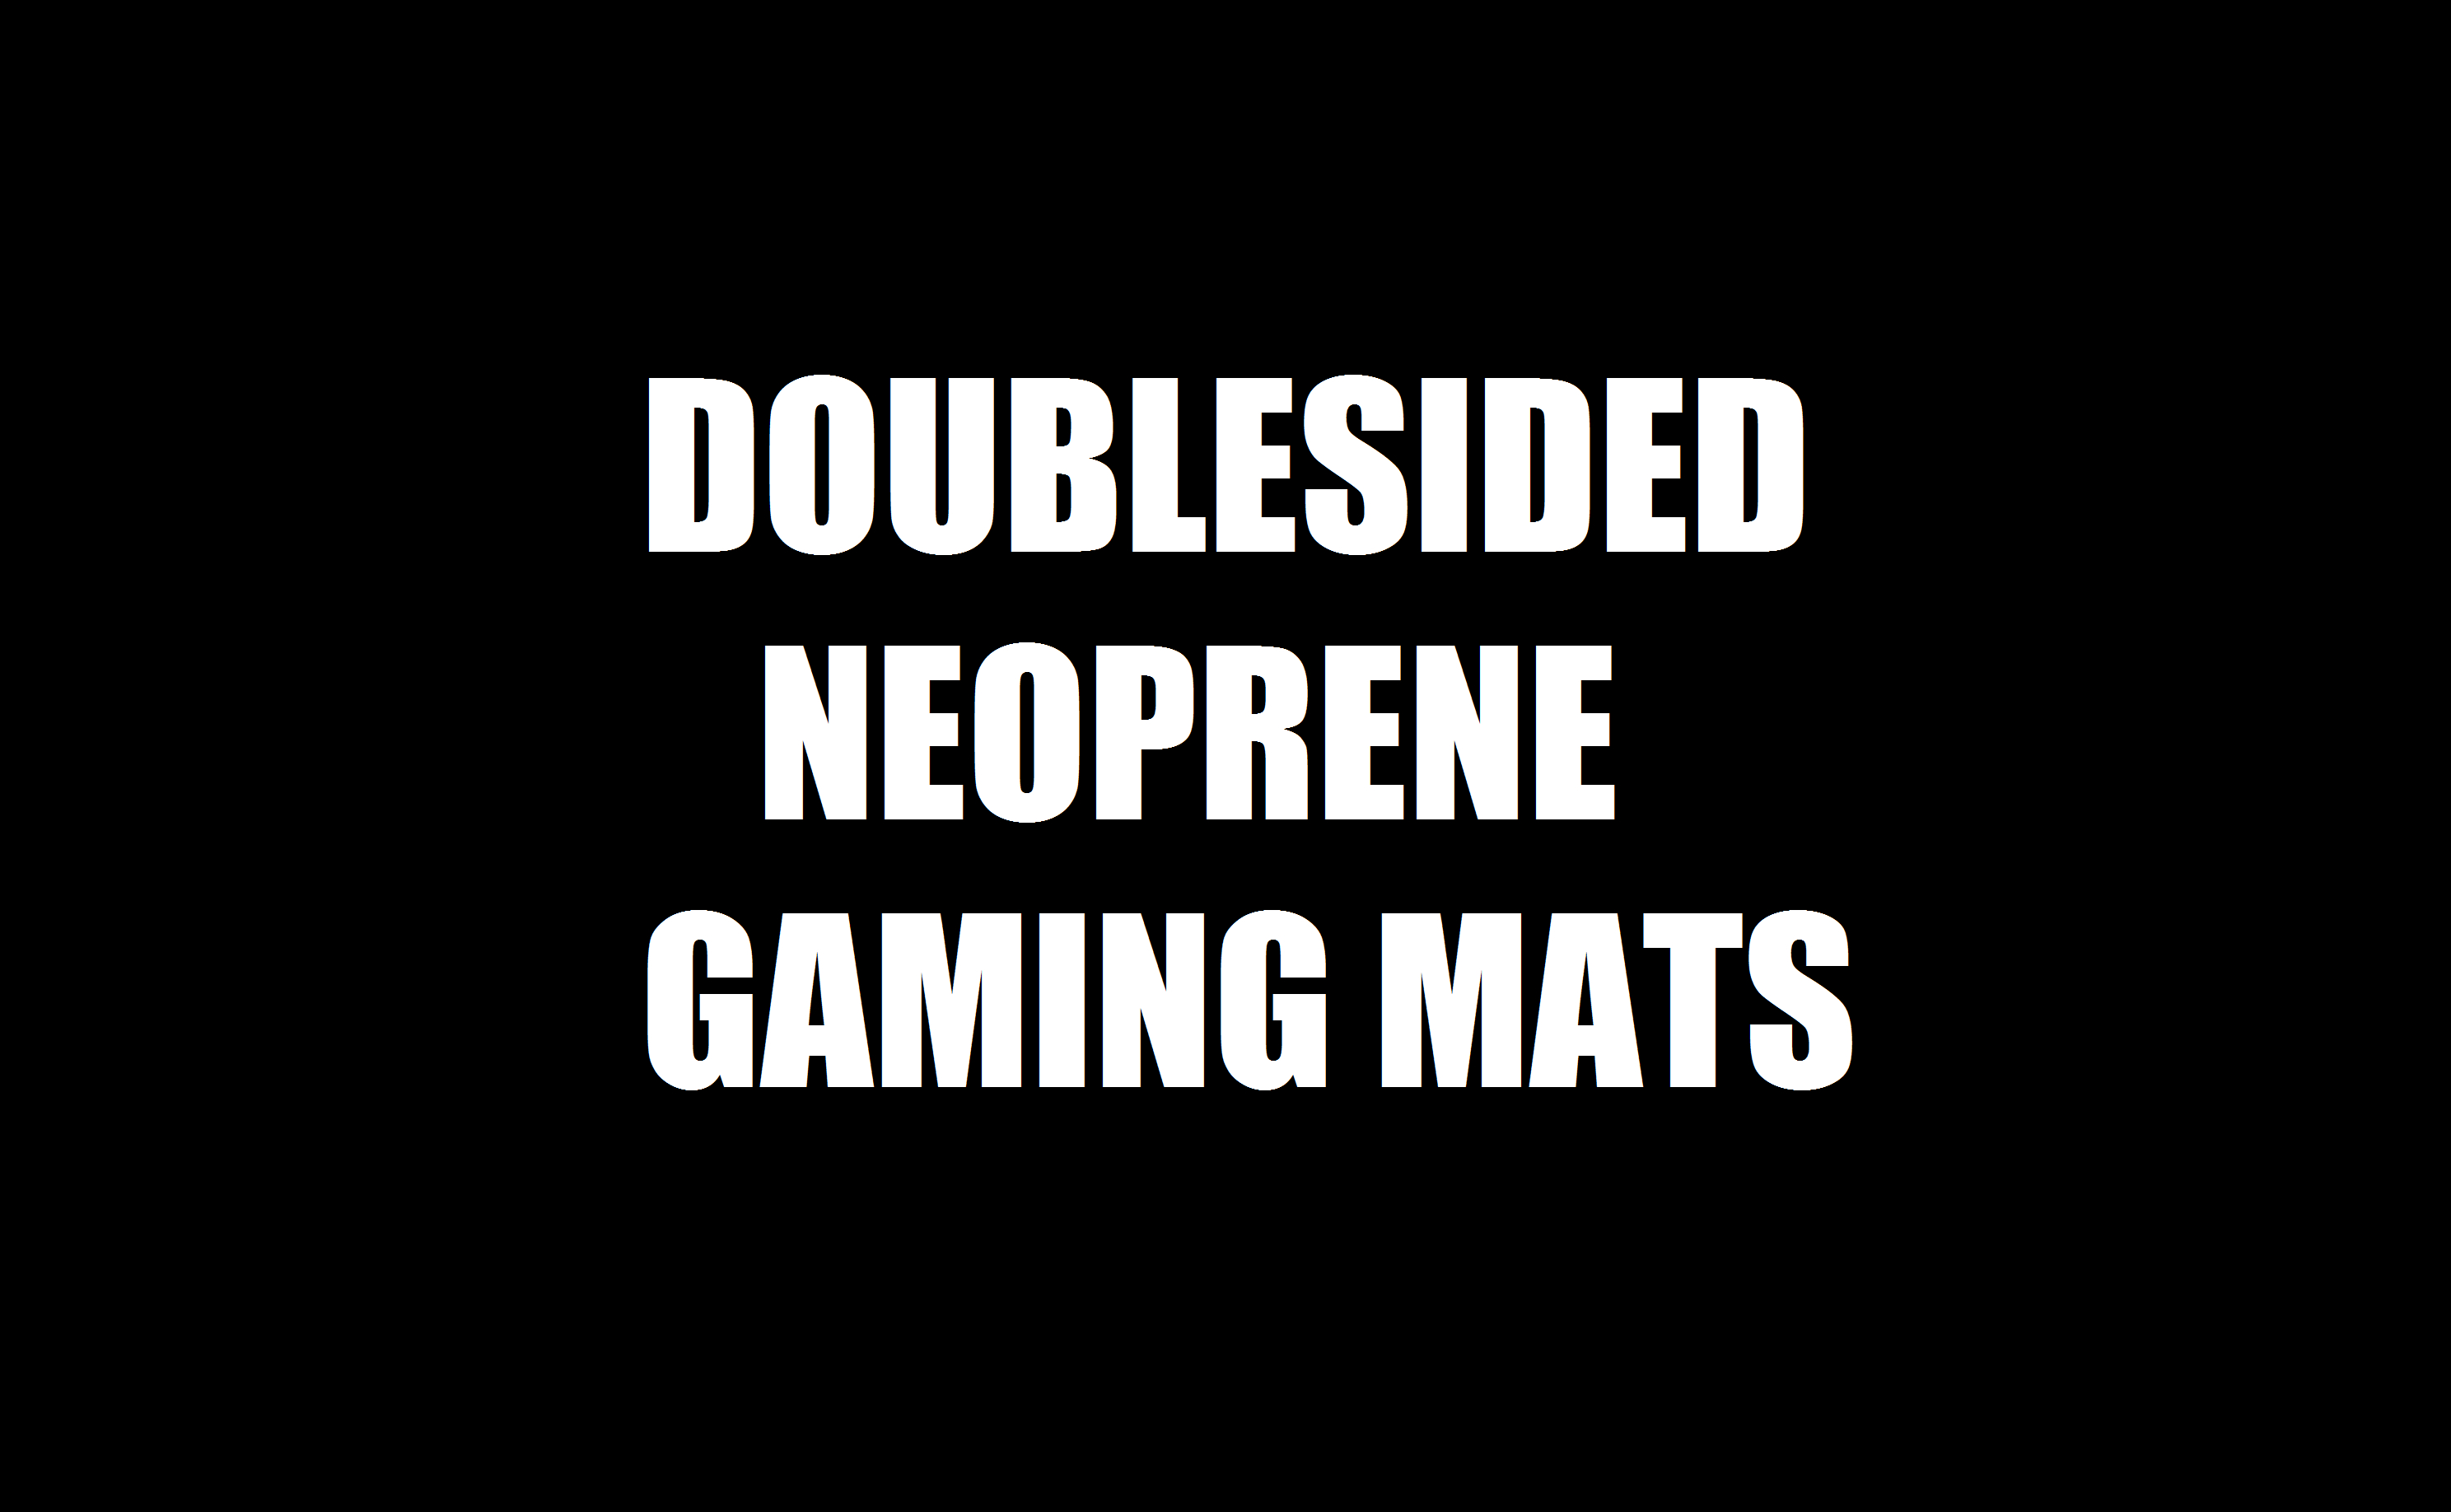 DOUBLESIDED neoprene gaming mats now available at URBANMATZ